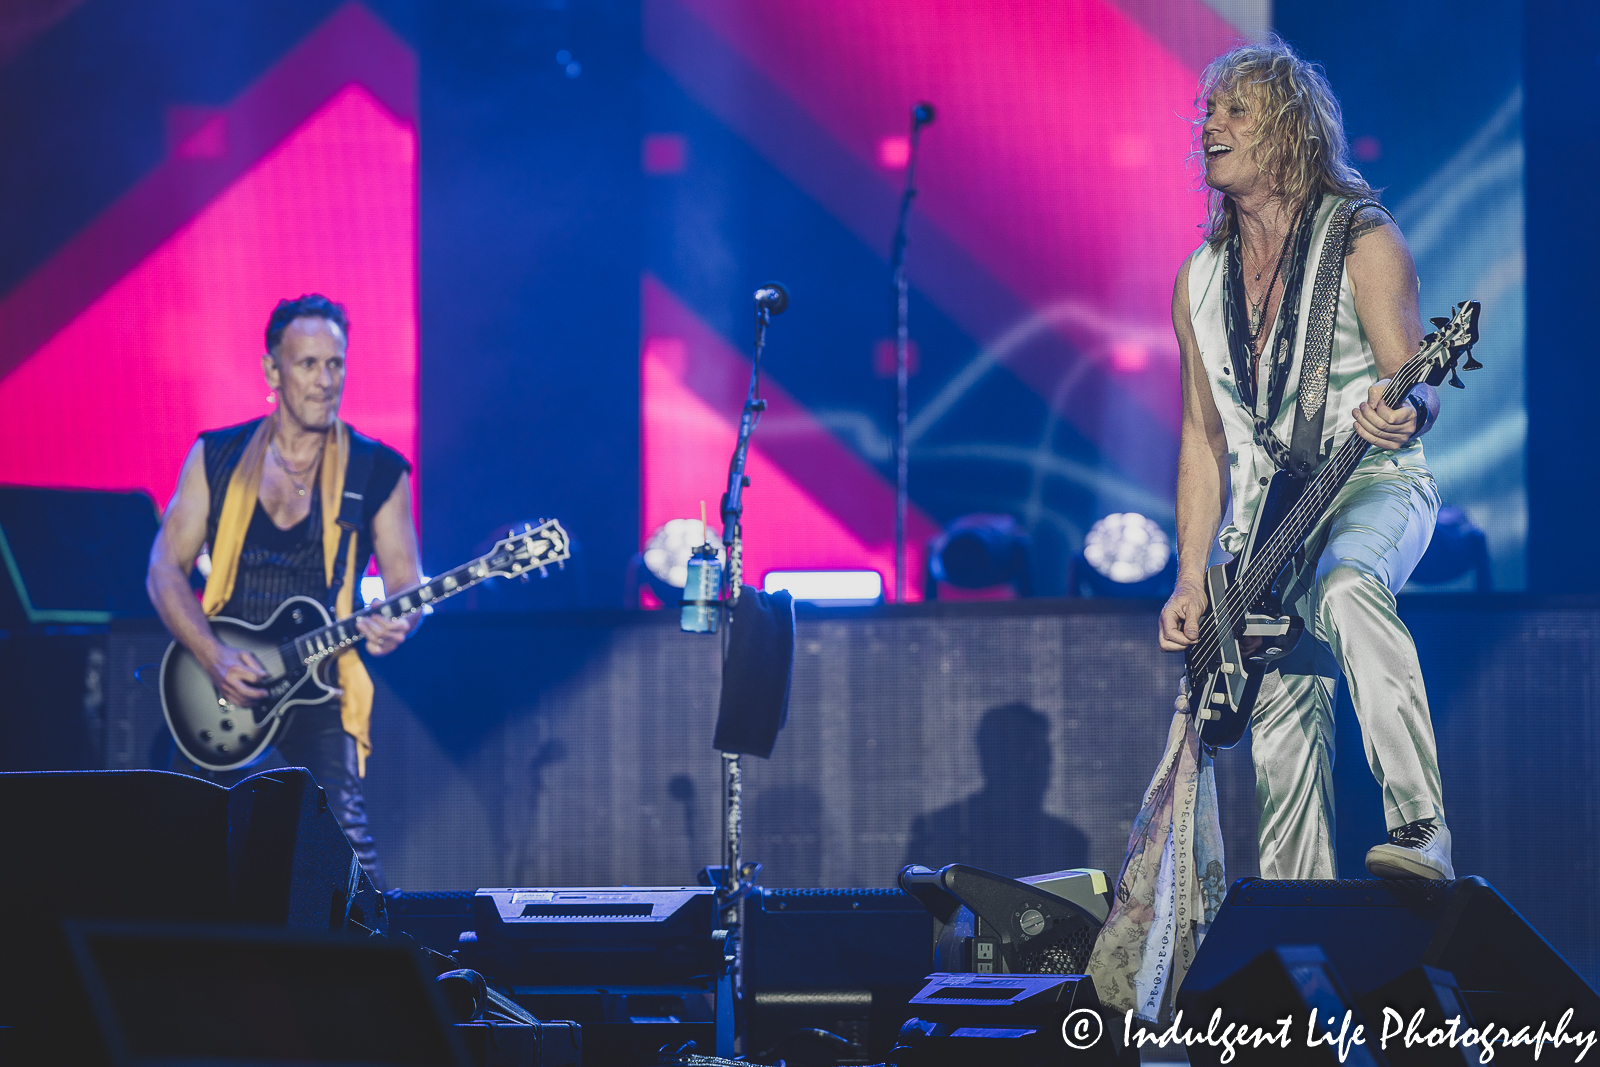 Def Leppard guitarist Vivian Campbell and bass player Rick Savage performing live together at Kauffman Stadium in Kansas City, MO on July 19, 2022.